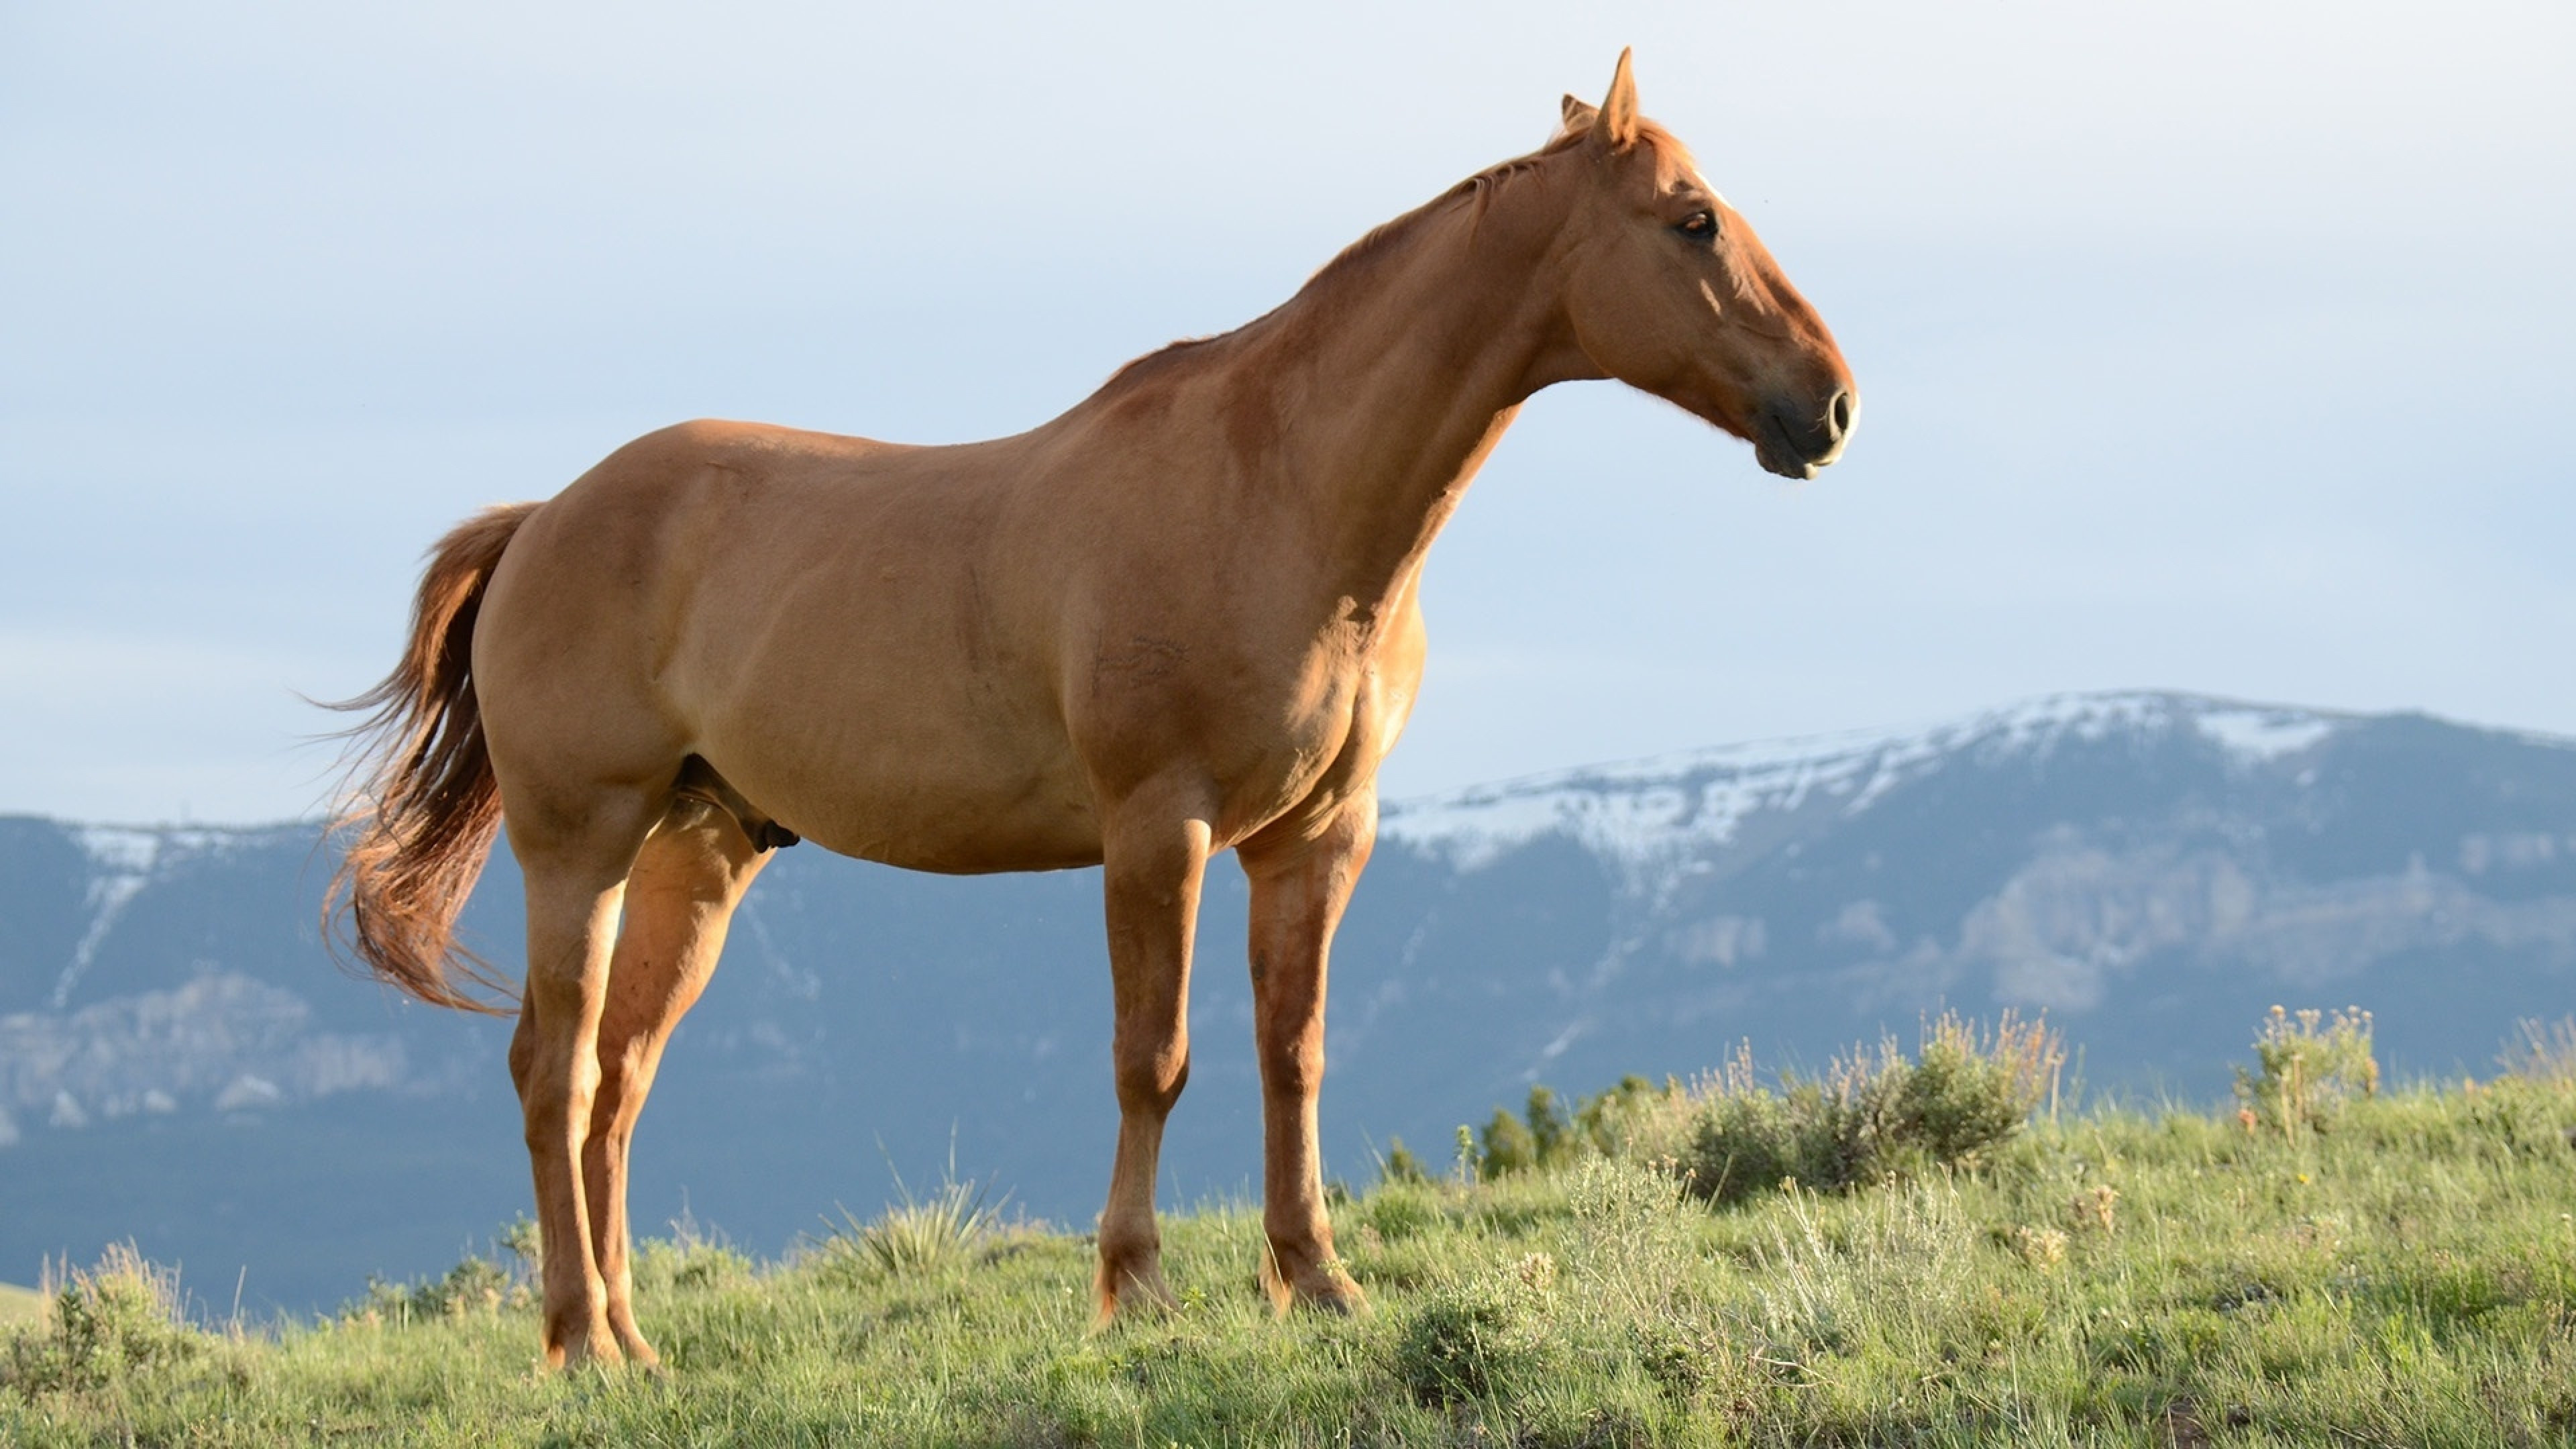 Horse: The American Quarter, A breed that excels at sprinting short distances. 3840x2160 4K Background.